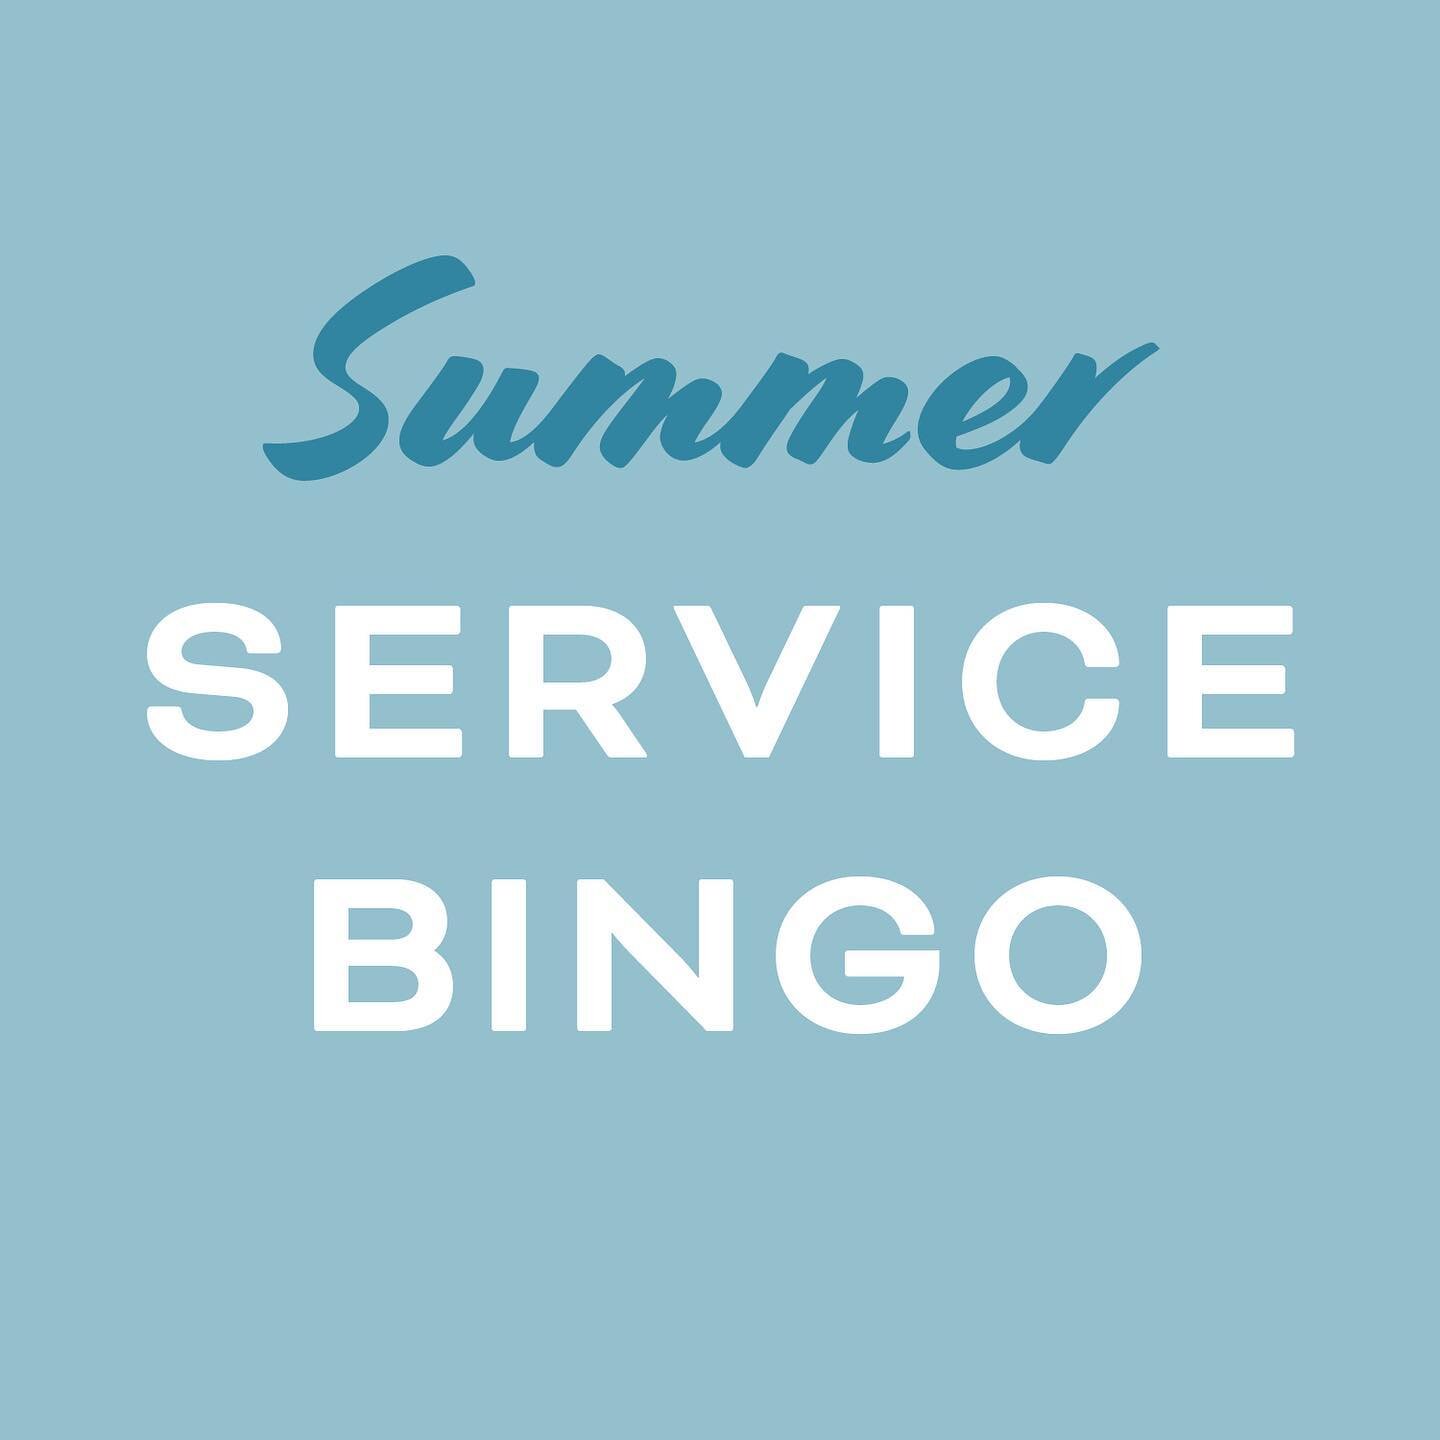 Ah, summer! We love having the kids out of school, unlimited beach days, pool time, and vacations.

But you know what makes summer extra memorable? Summer Service Bingo!

We&rsquo;ve made it easy to find ways to serve your family, neighborhood, and a